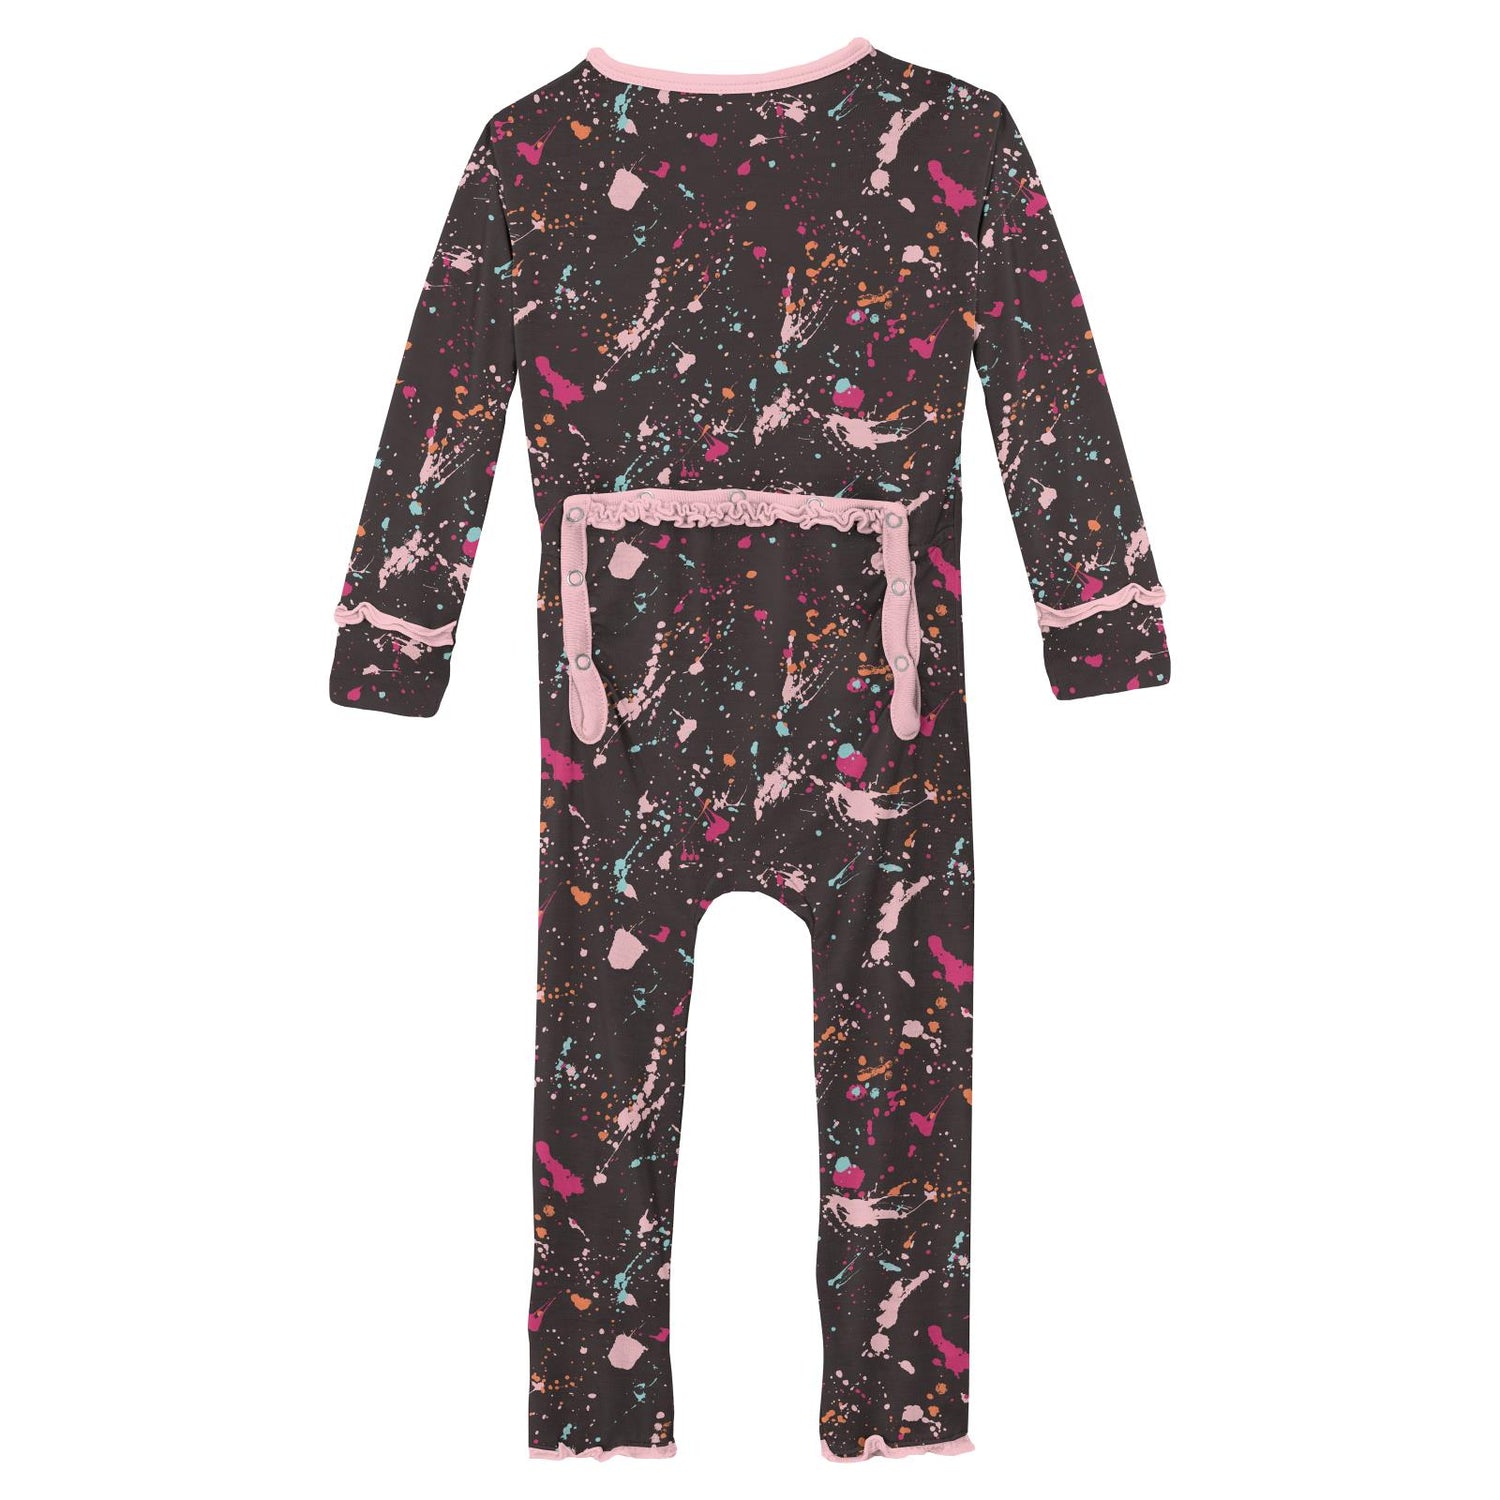 Print Muffin Ruffle Coverall with 2 Way Zipper in Calypso Splatter Paint